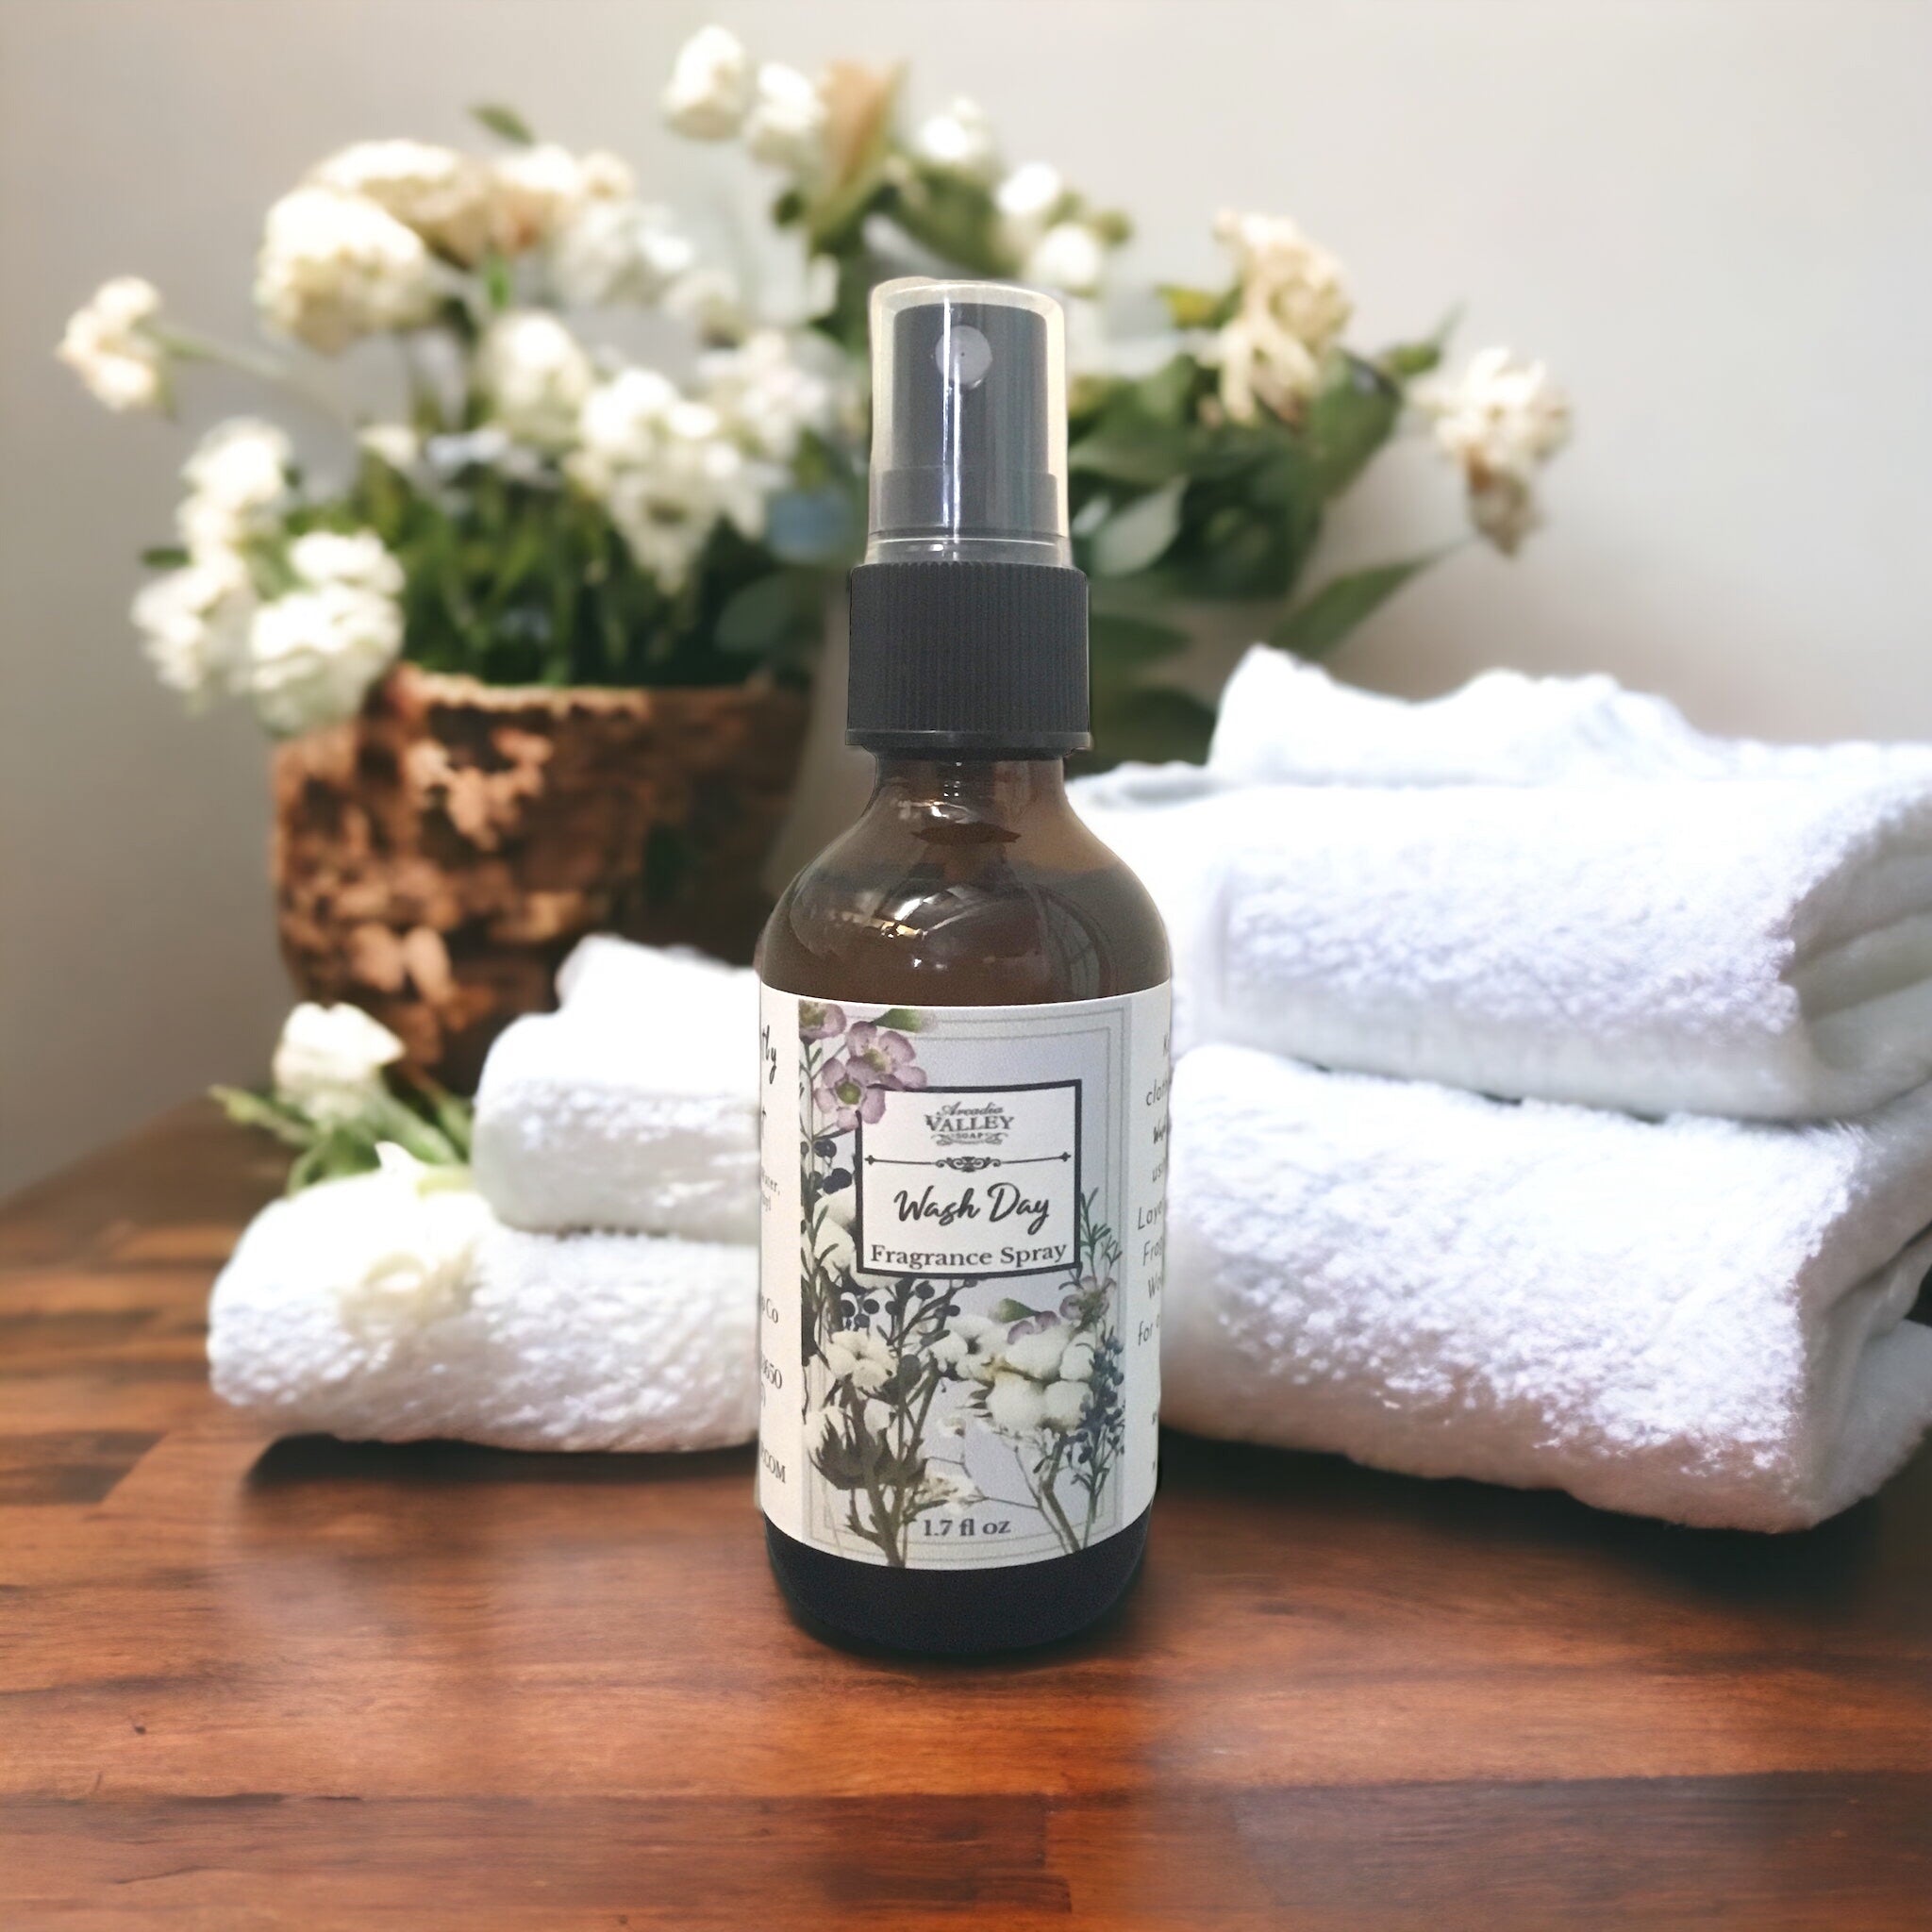 Wash Day Fragrance Spray in a glass amber bottle with plastic mister and floral decorative label on a wooden table with white towels and a basket of flowers in the background